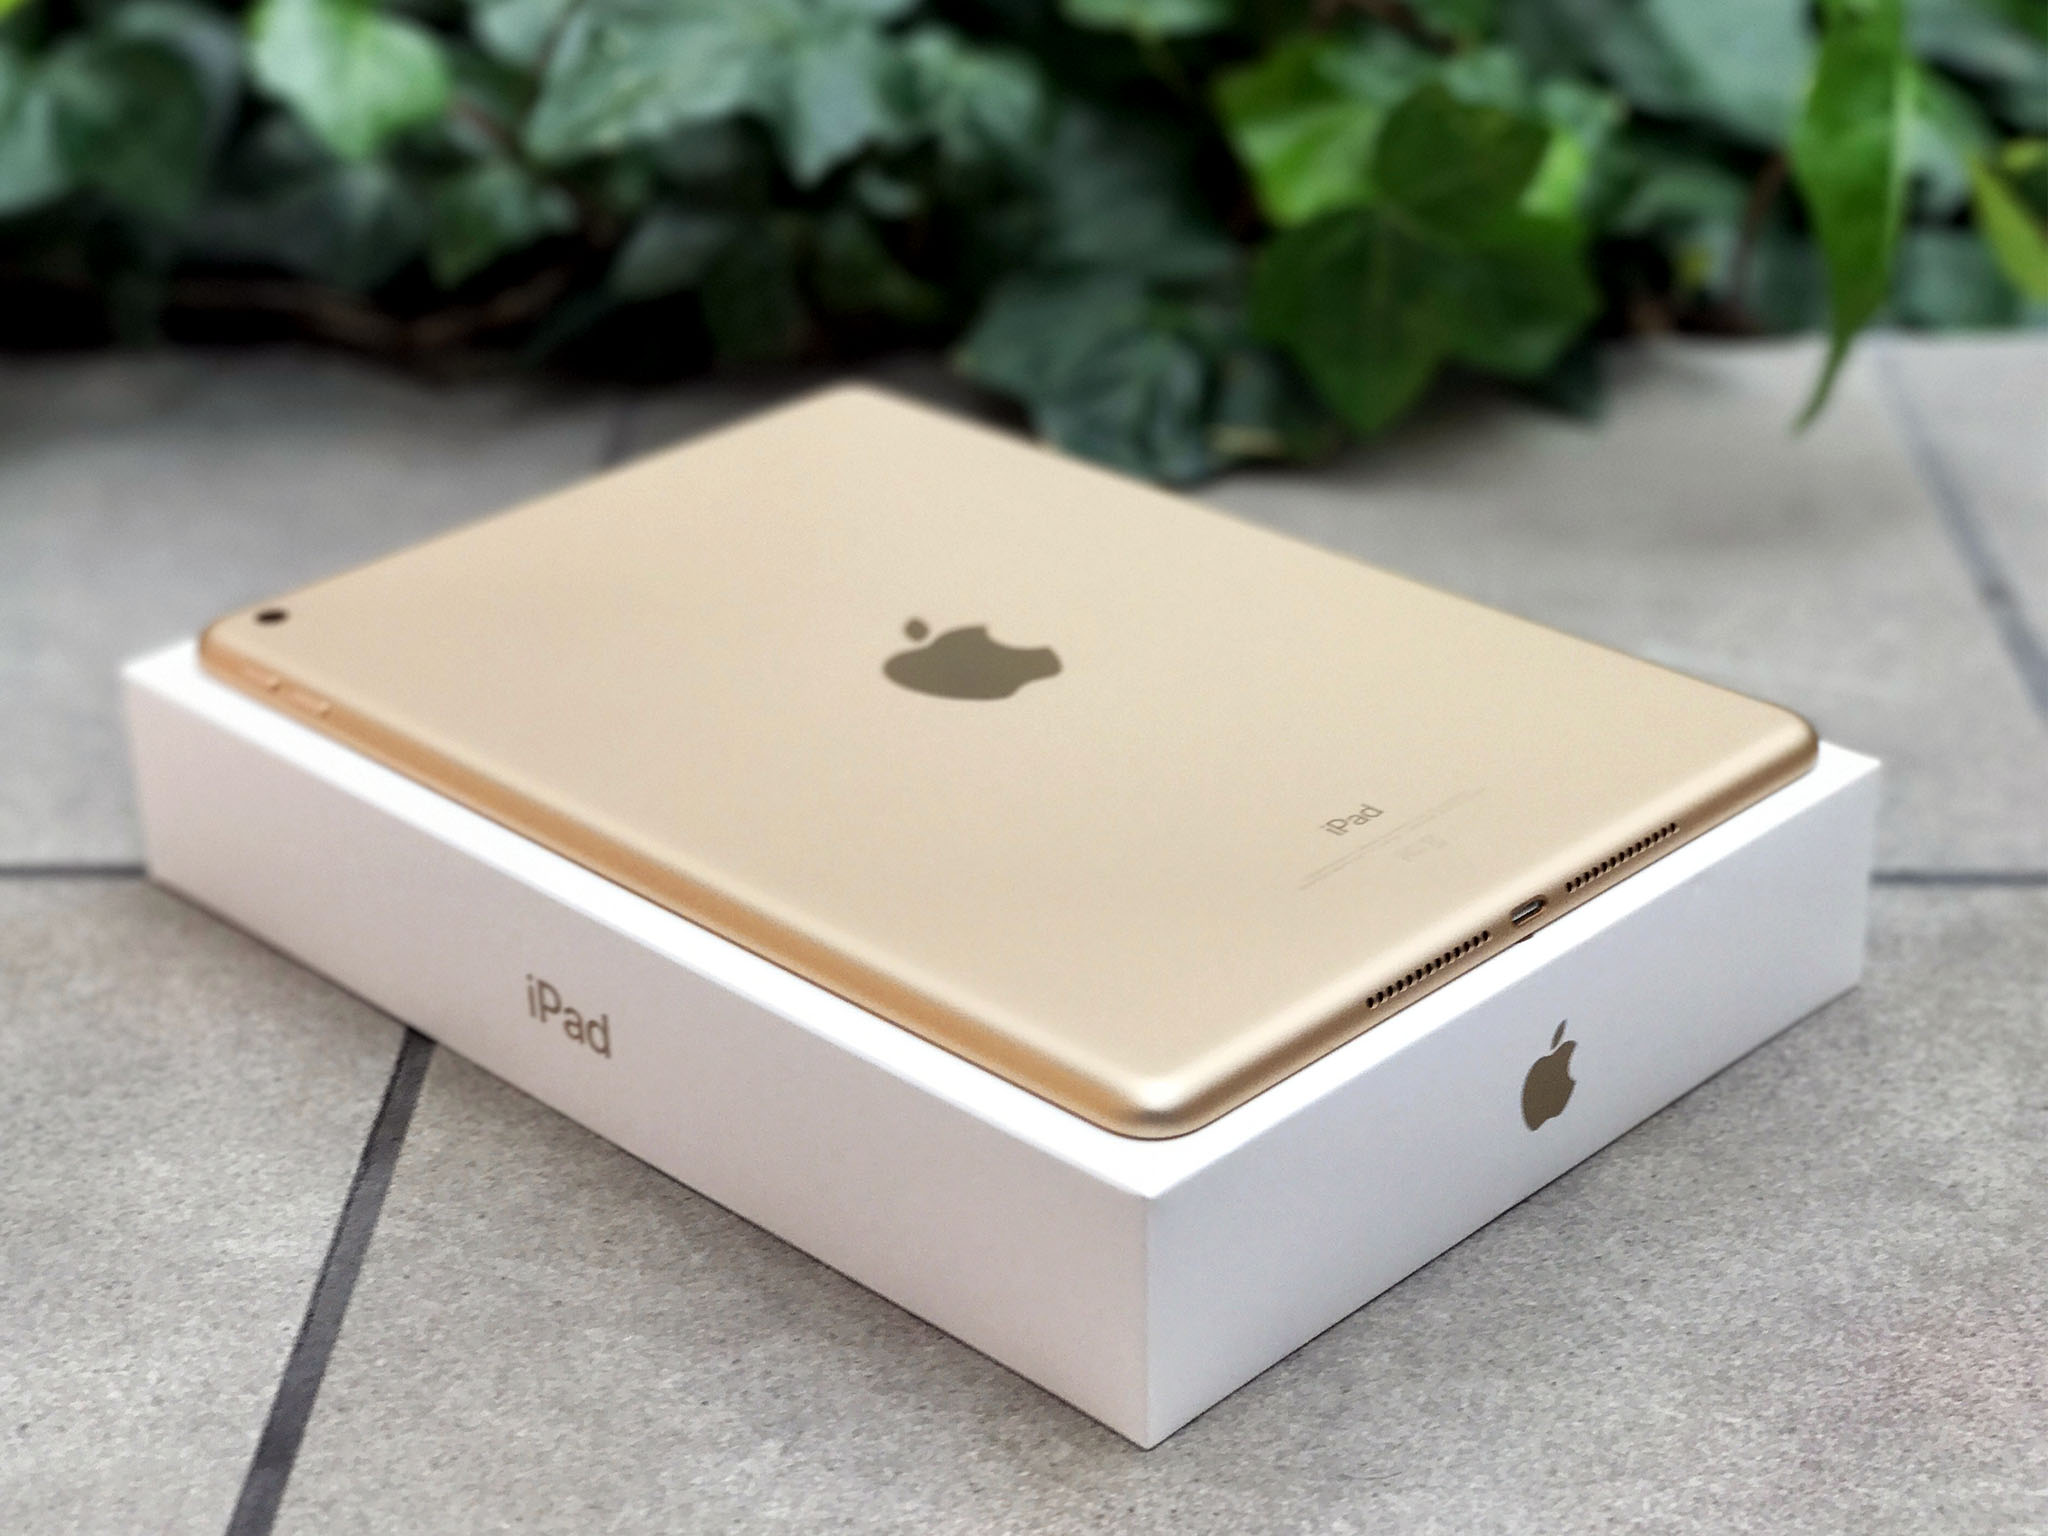 iPad (5th generation) review The best value in tablets today iMore